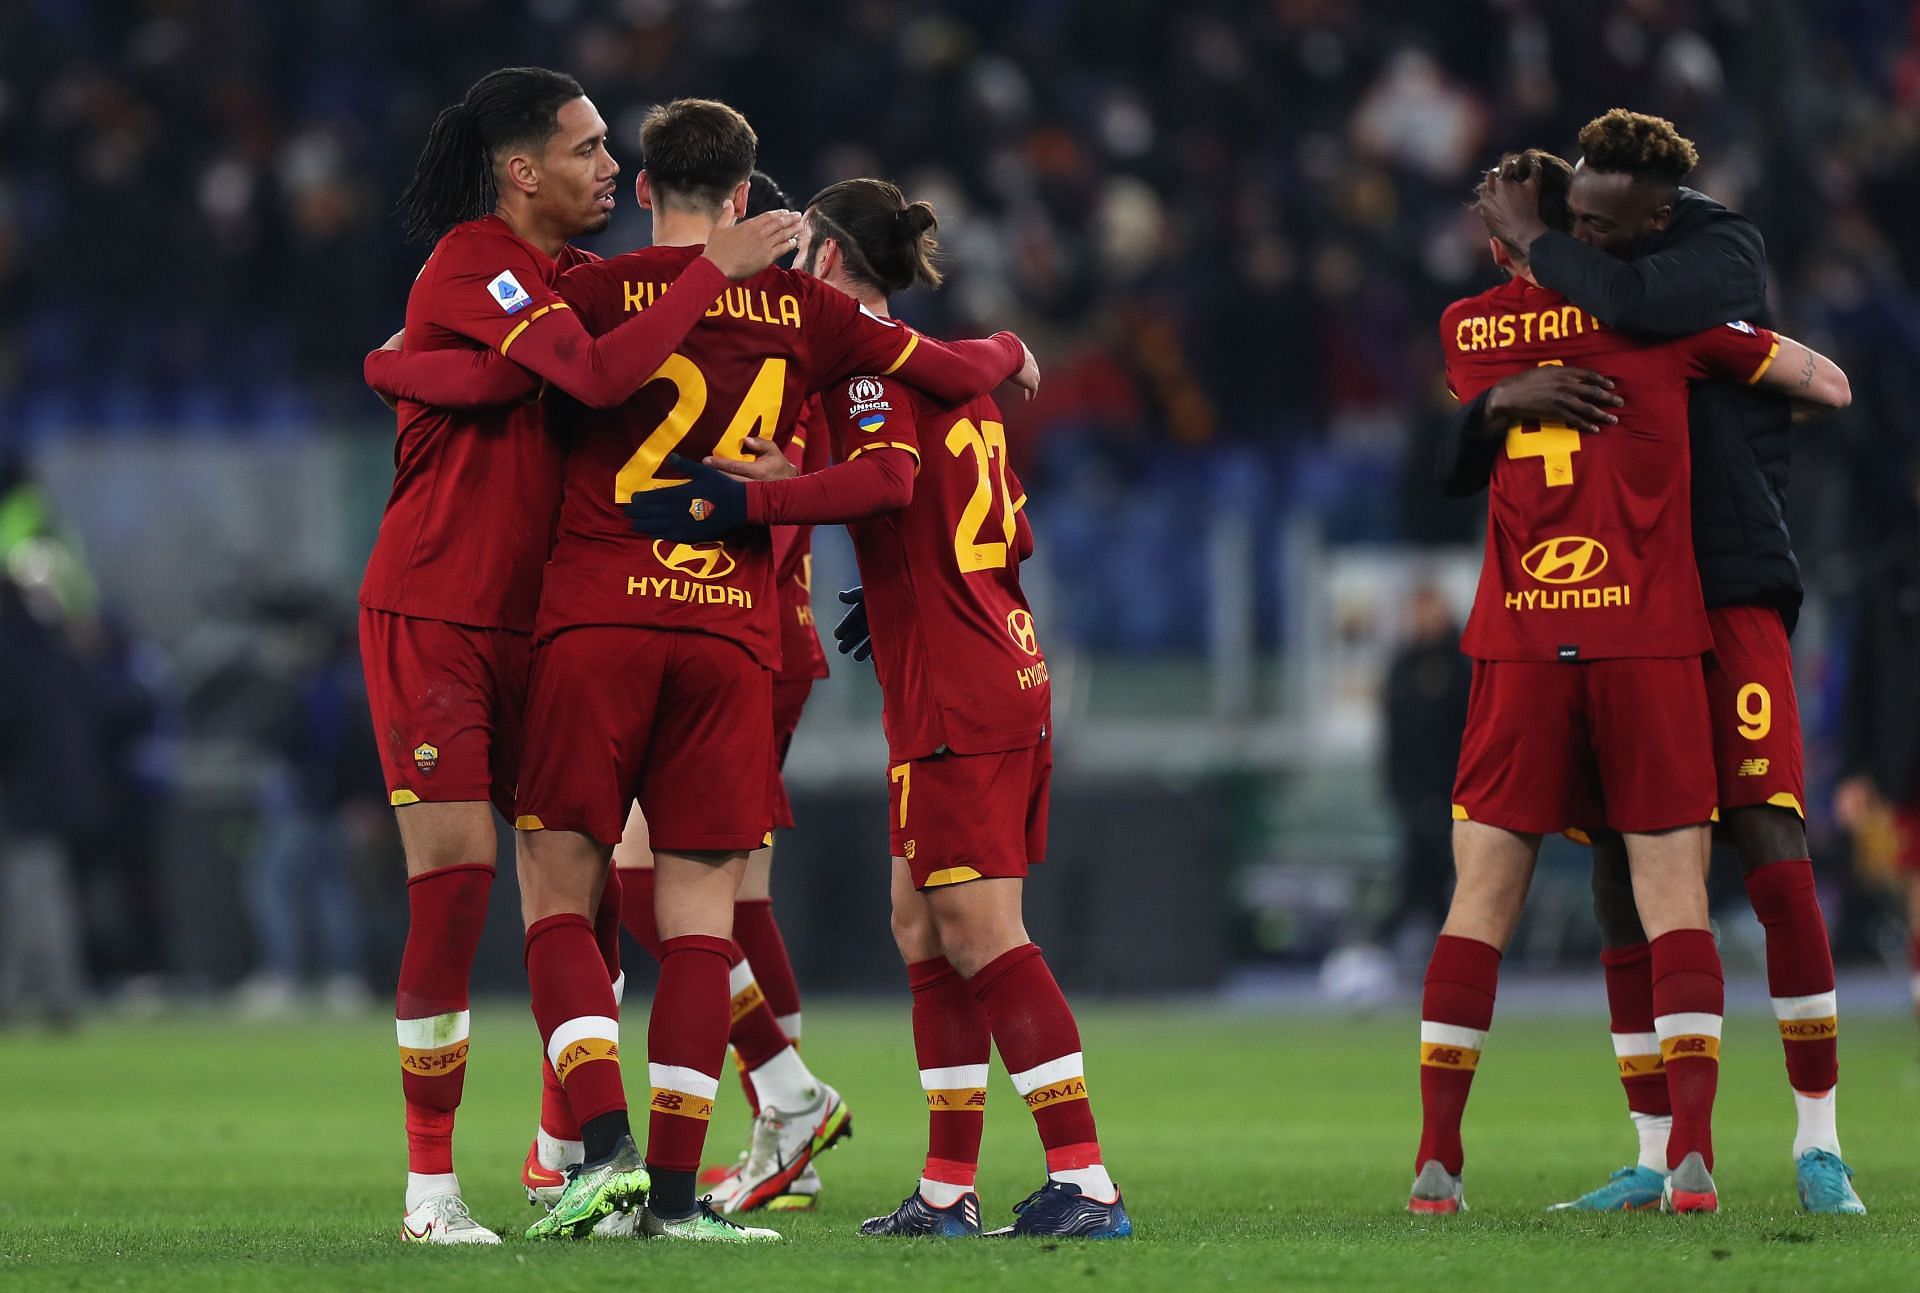 AS Roma will face Vitesse on Thursday - UEFA Europa Conference League